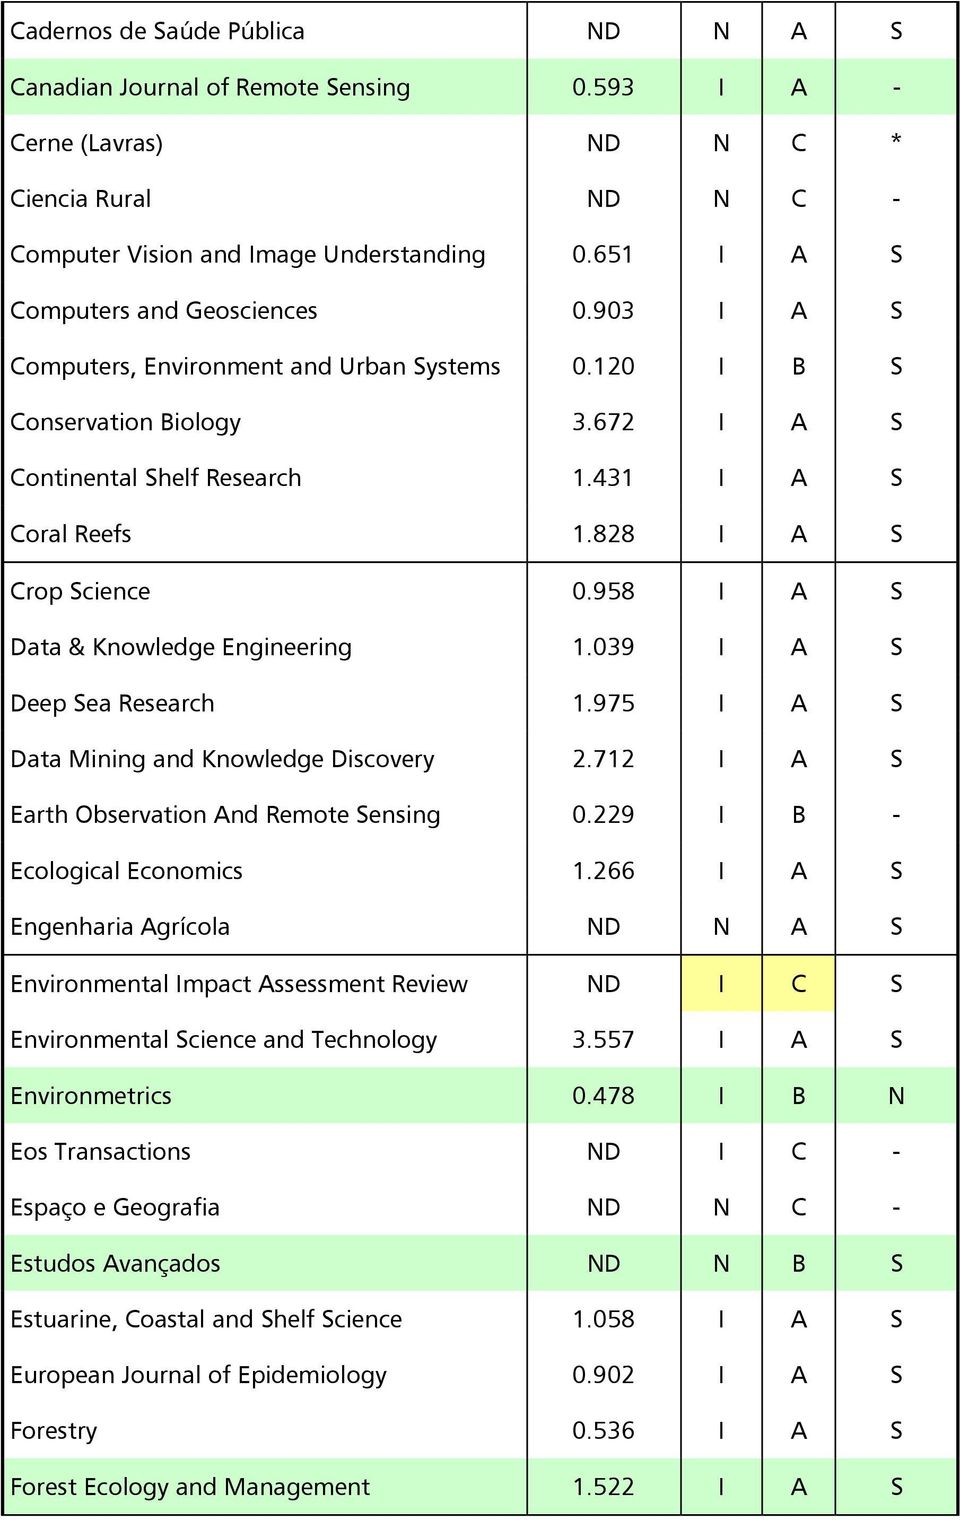 828 I A S Crop Science 0.958 I A S Data & Knowledge Engineering 1.039 I A S Deep Sea Research 1.975 I A S Data Mining and Knowledge Discovery 2.712 I A S Earth Observation And Remote Sensing 0.